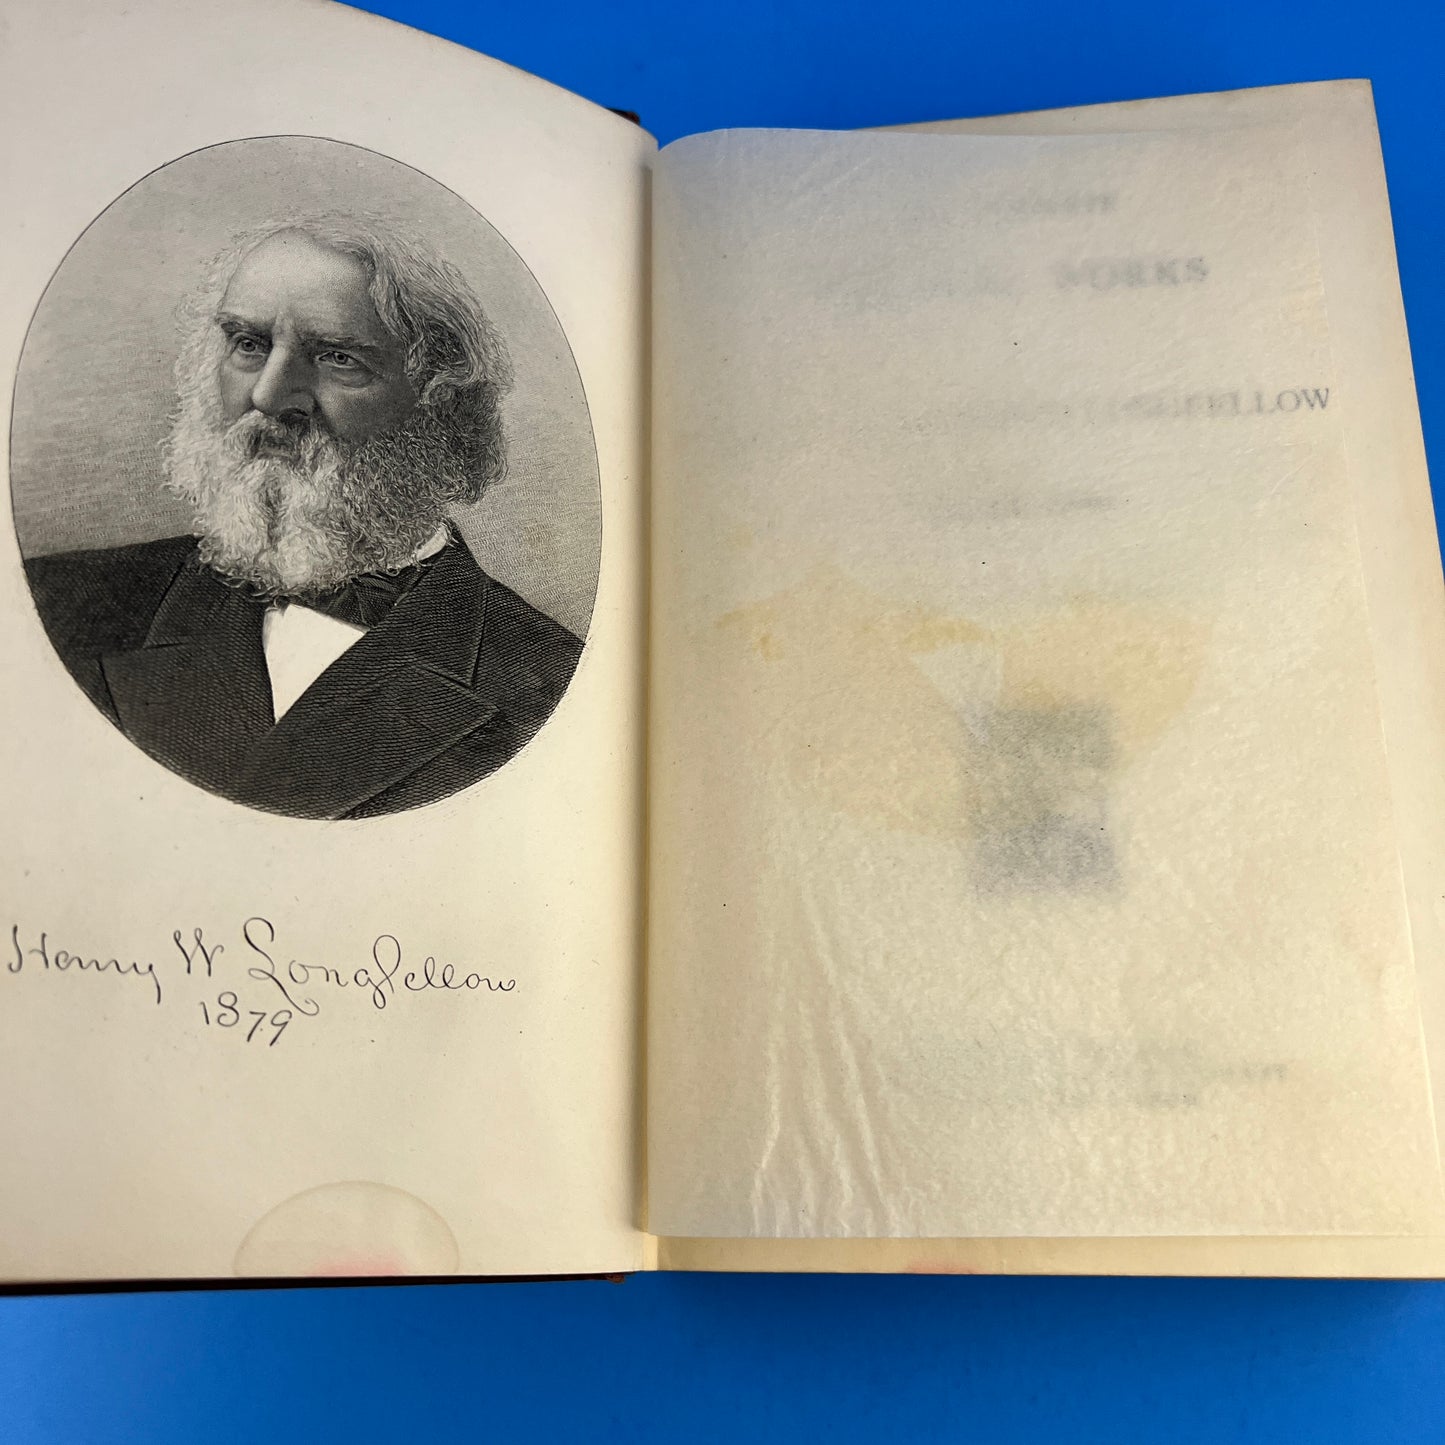 The Complete Poetical Works of Longfellow